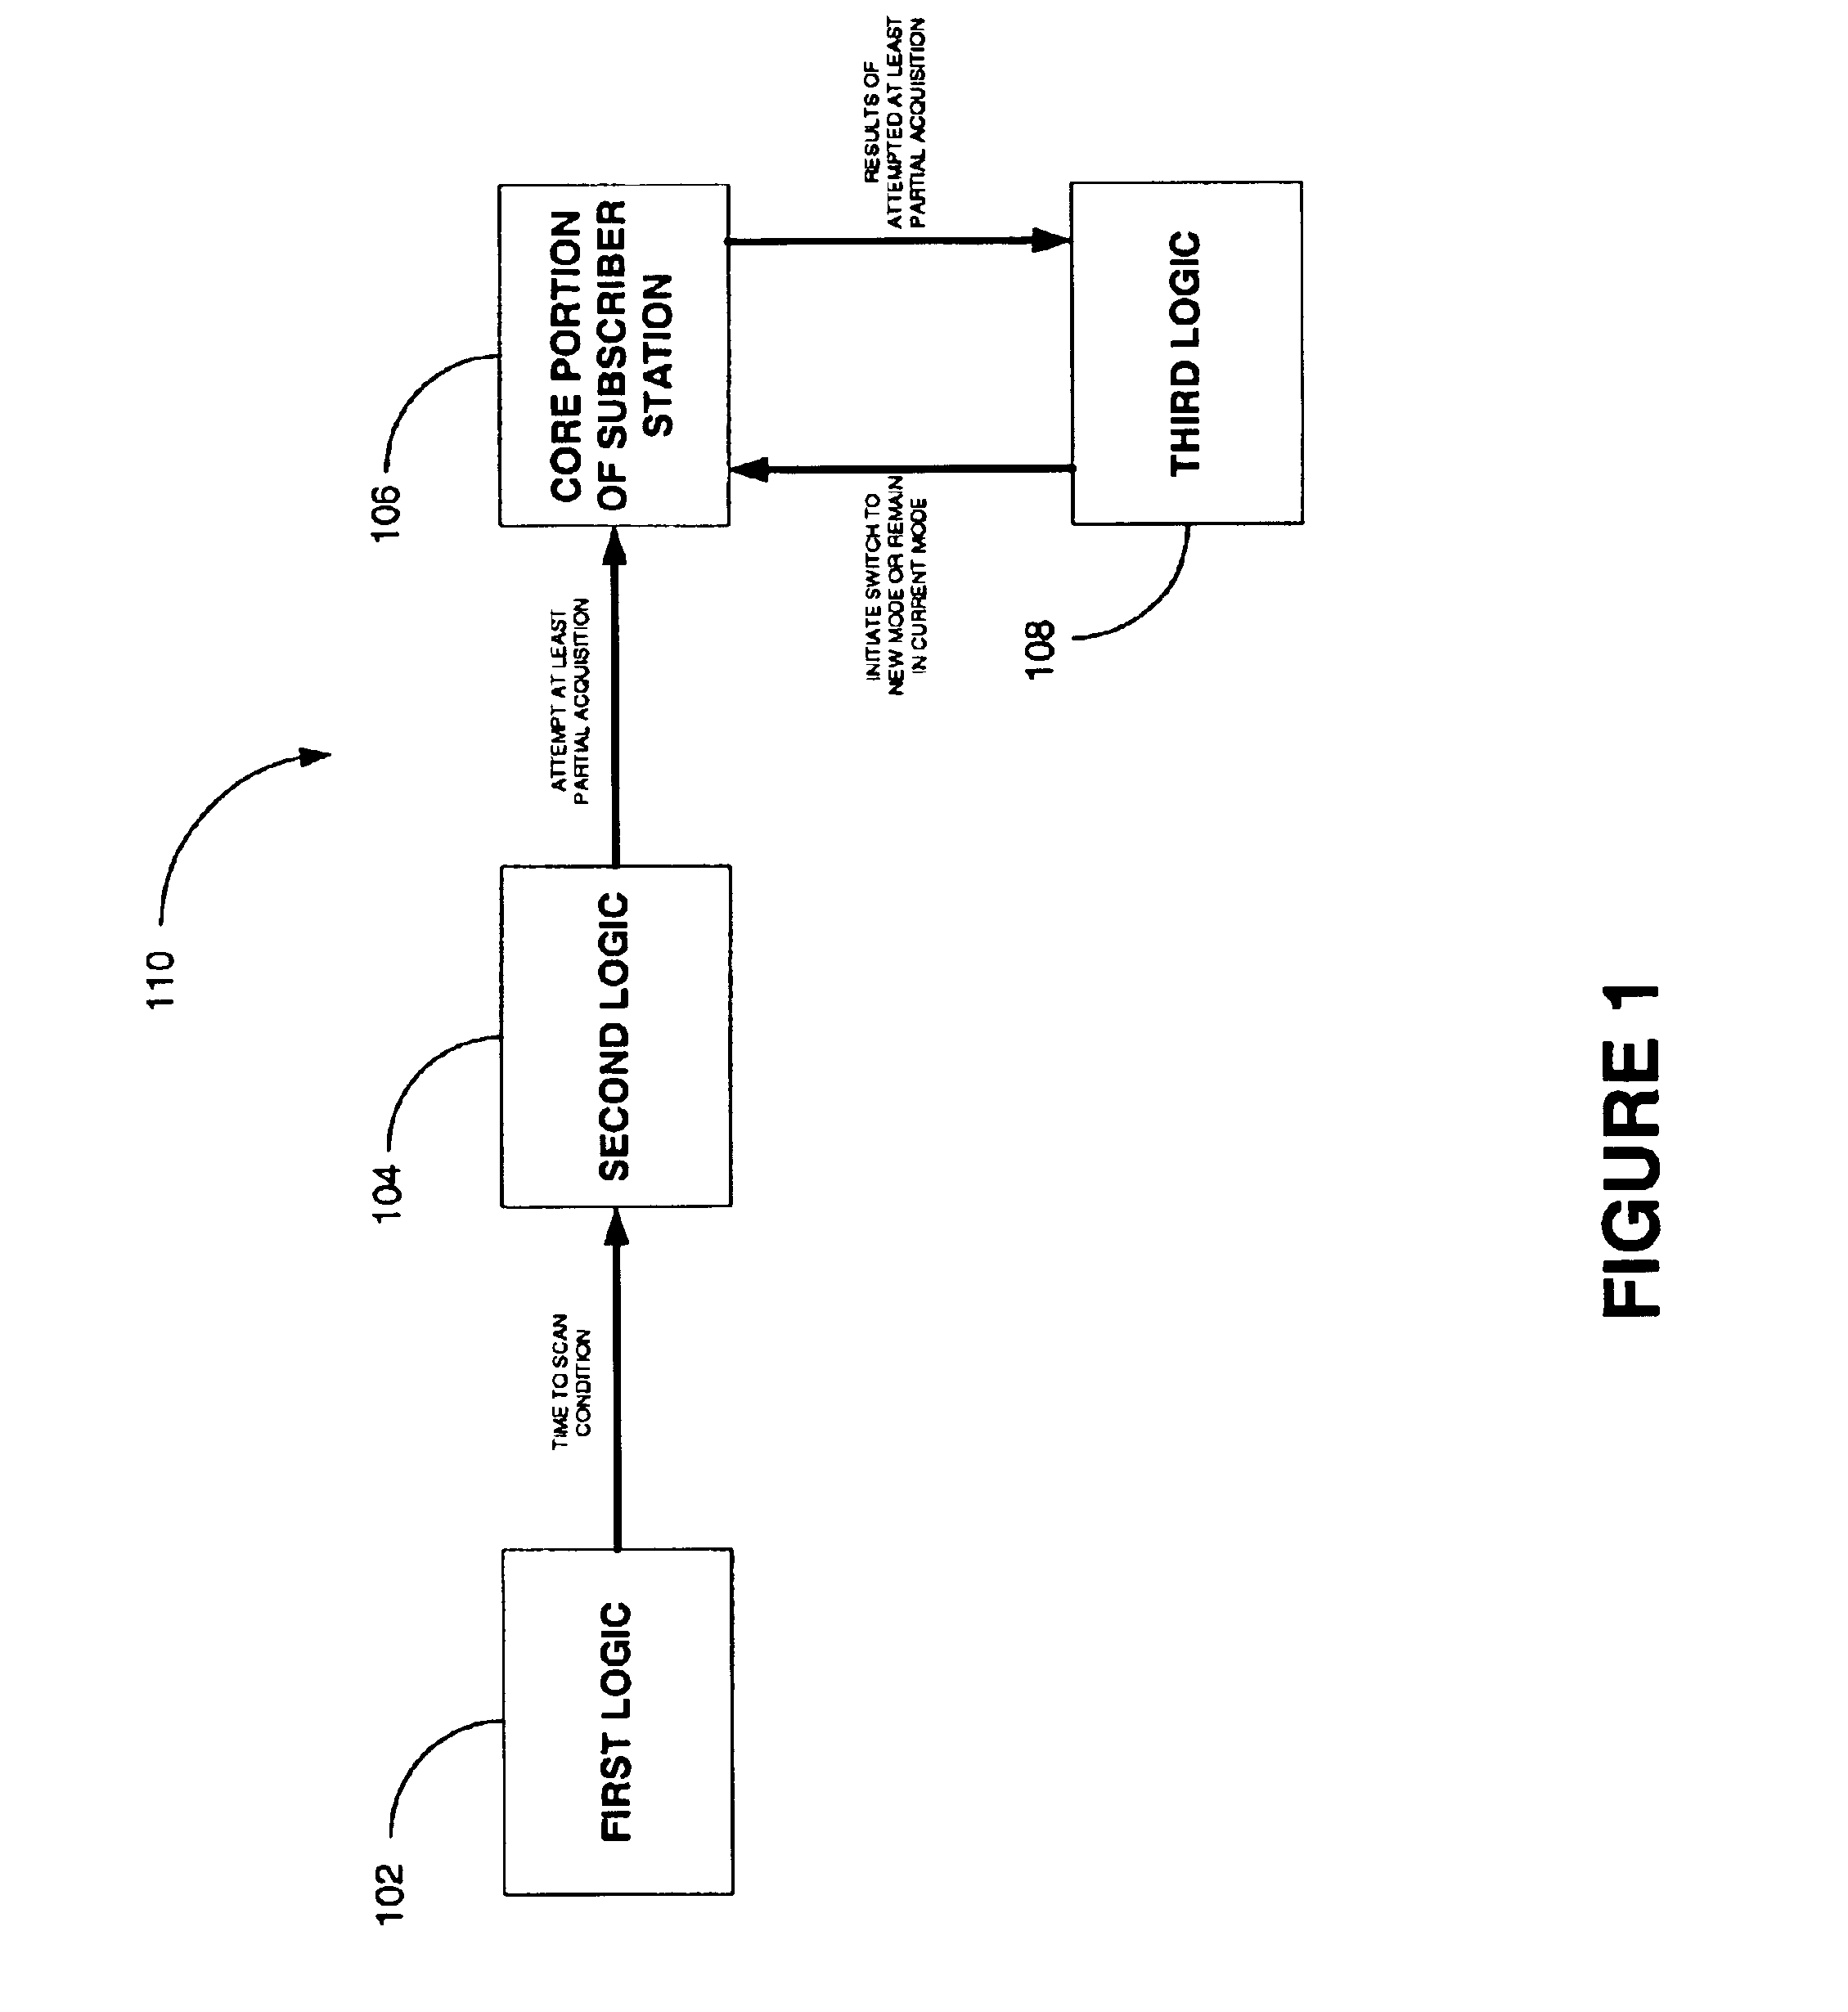 Subscriber station with dynamic multi-mode service acquisition capability